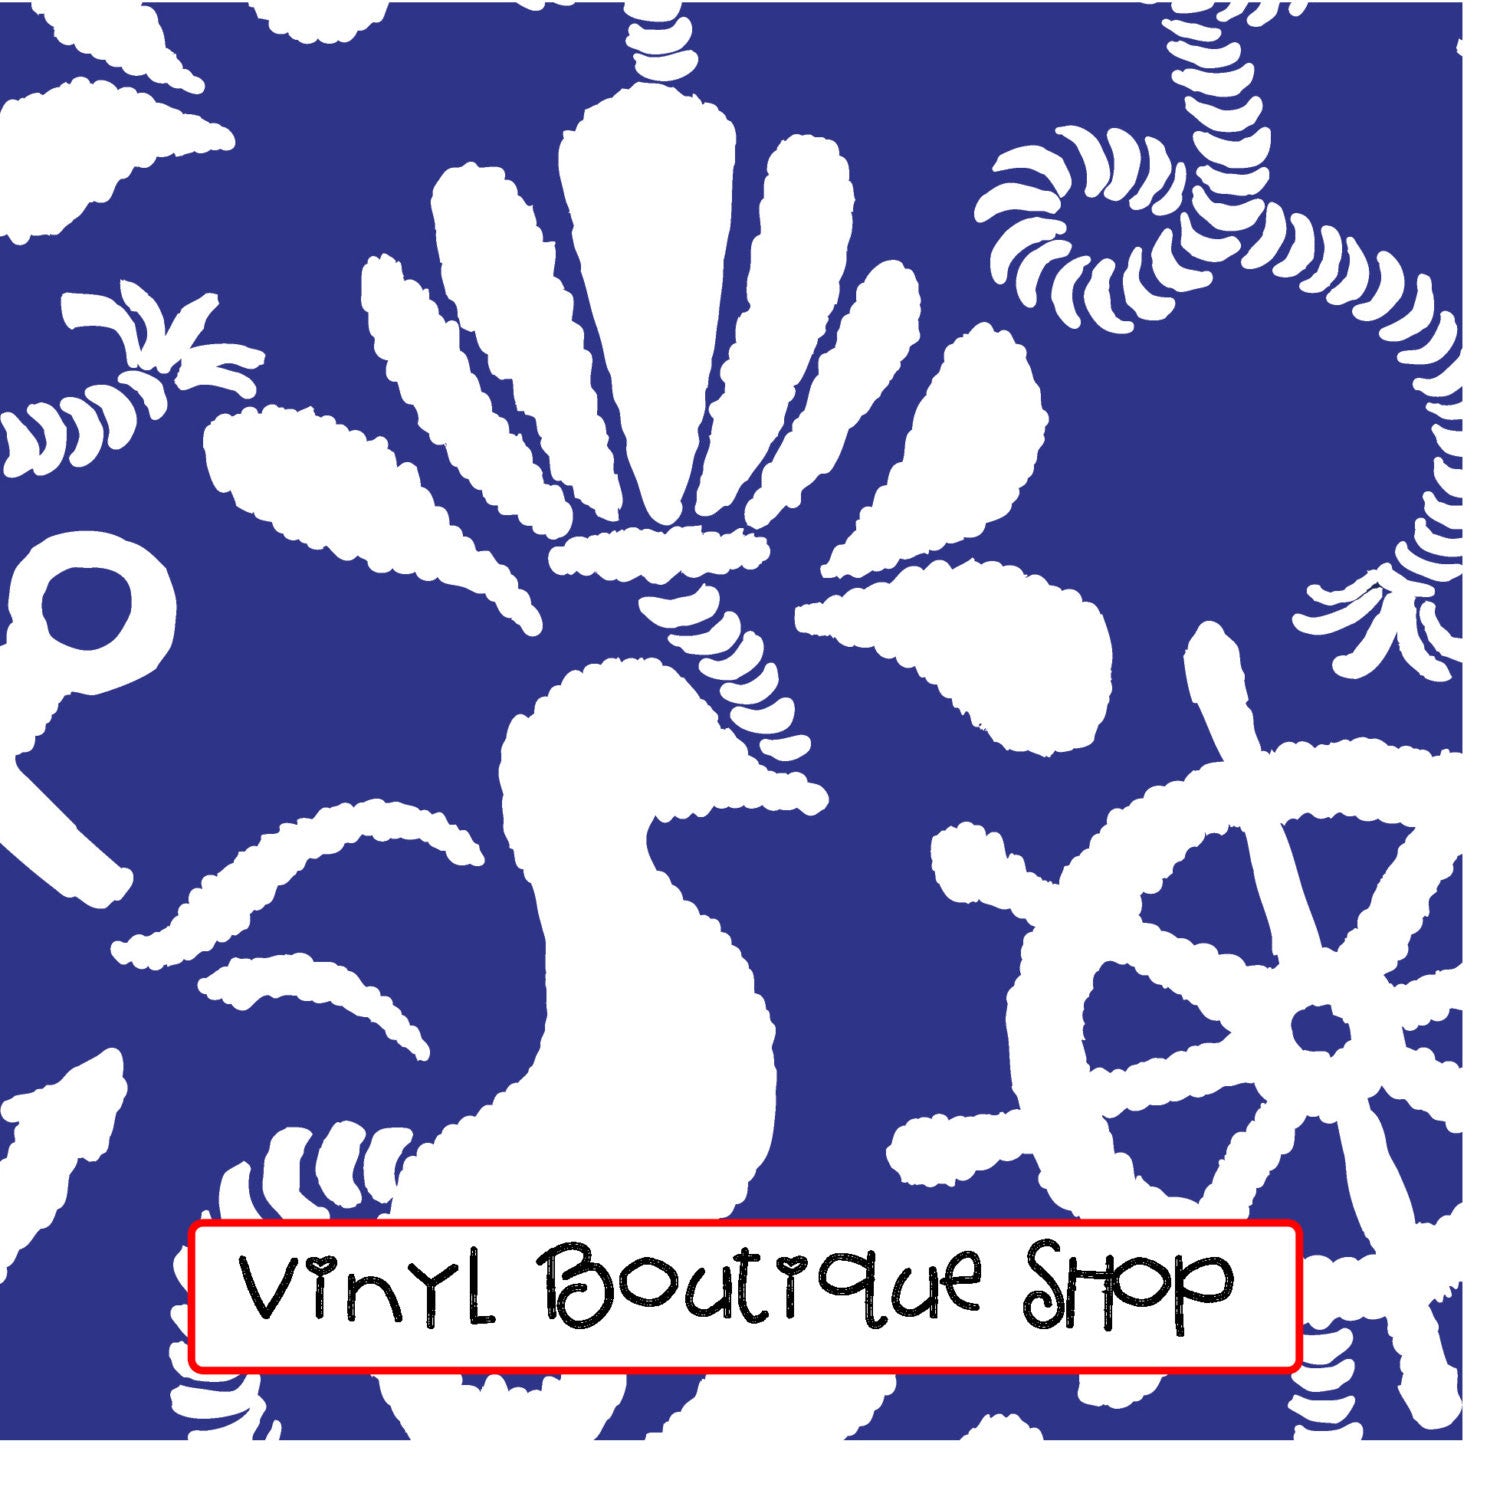 Navy Blue Anchors Away Lilly Inspired Printed Patterned Craft Vinyl - Vinyl Boutique Shop